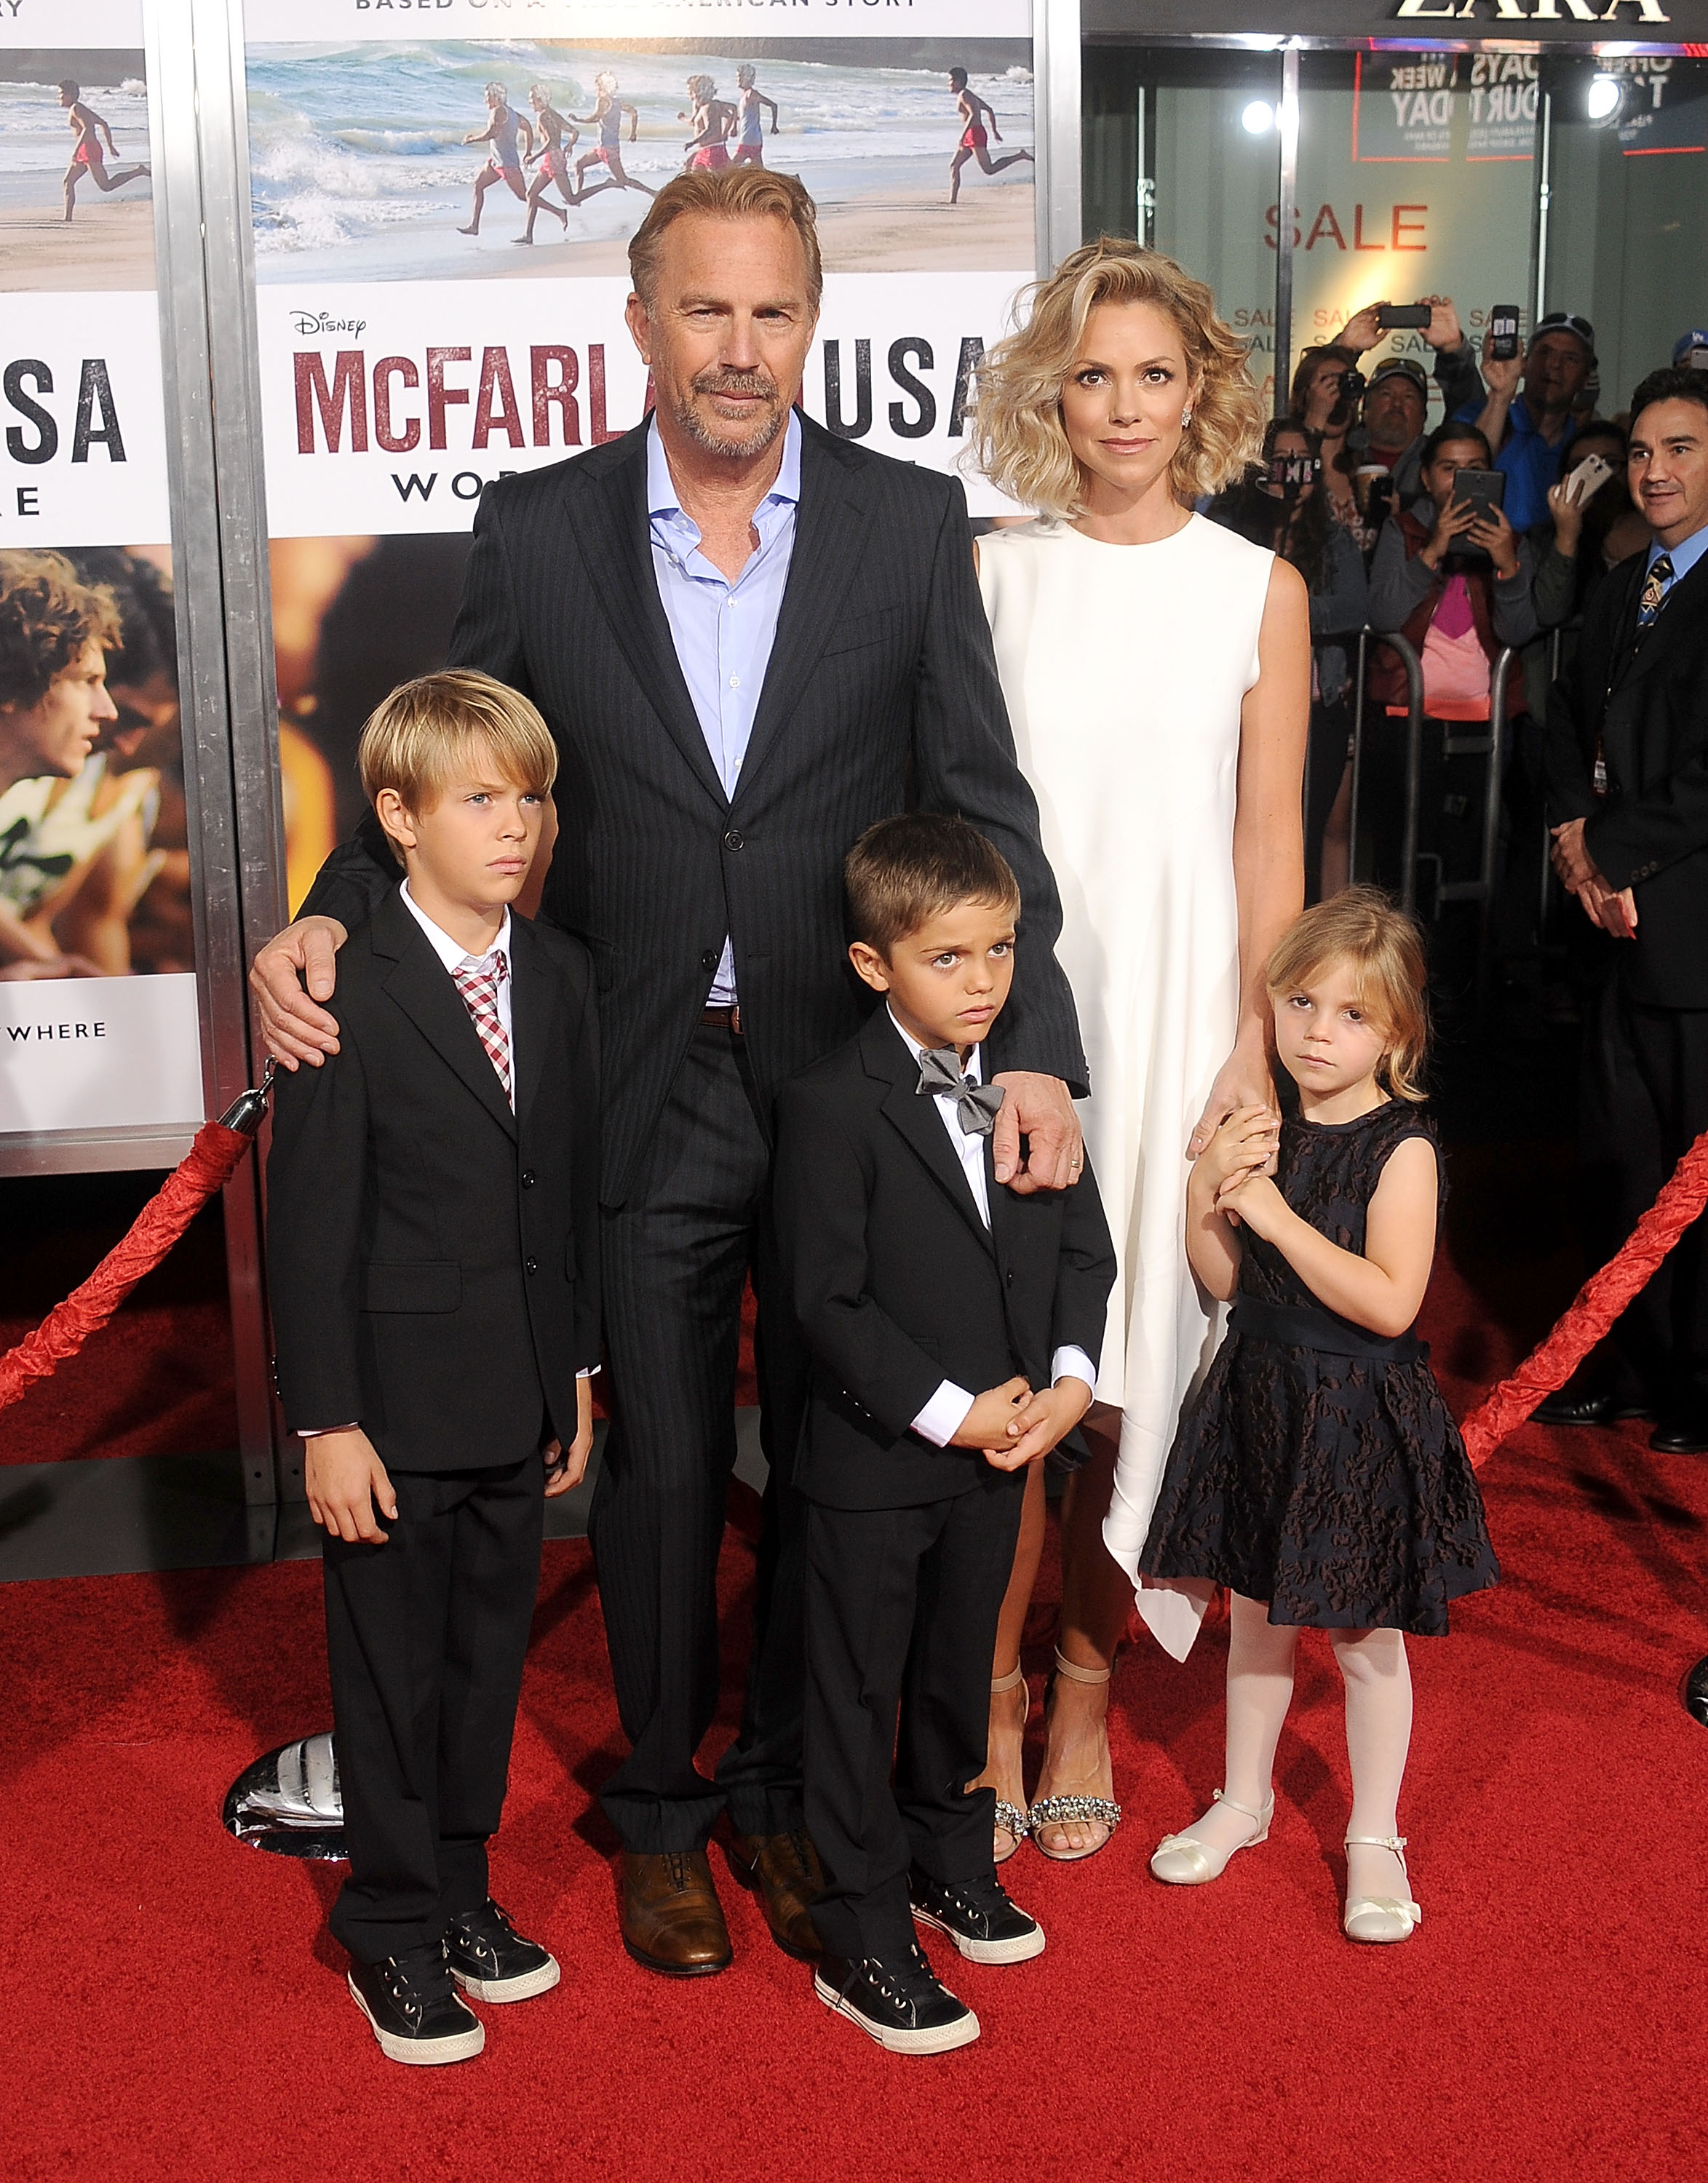 Kevin Costner, Christine Baumgartner and their children, Grace Avery Costner, Hayes Logan Costner and Cayden Wyatt Costner, at the premiere of Disney's "McFarland, USA" at the El Capitan Theatre, on February 9, 2015, in Hollywood, California. | Source: Getty Images